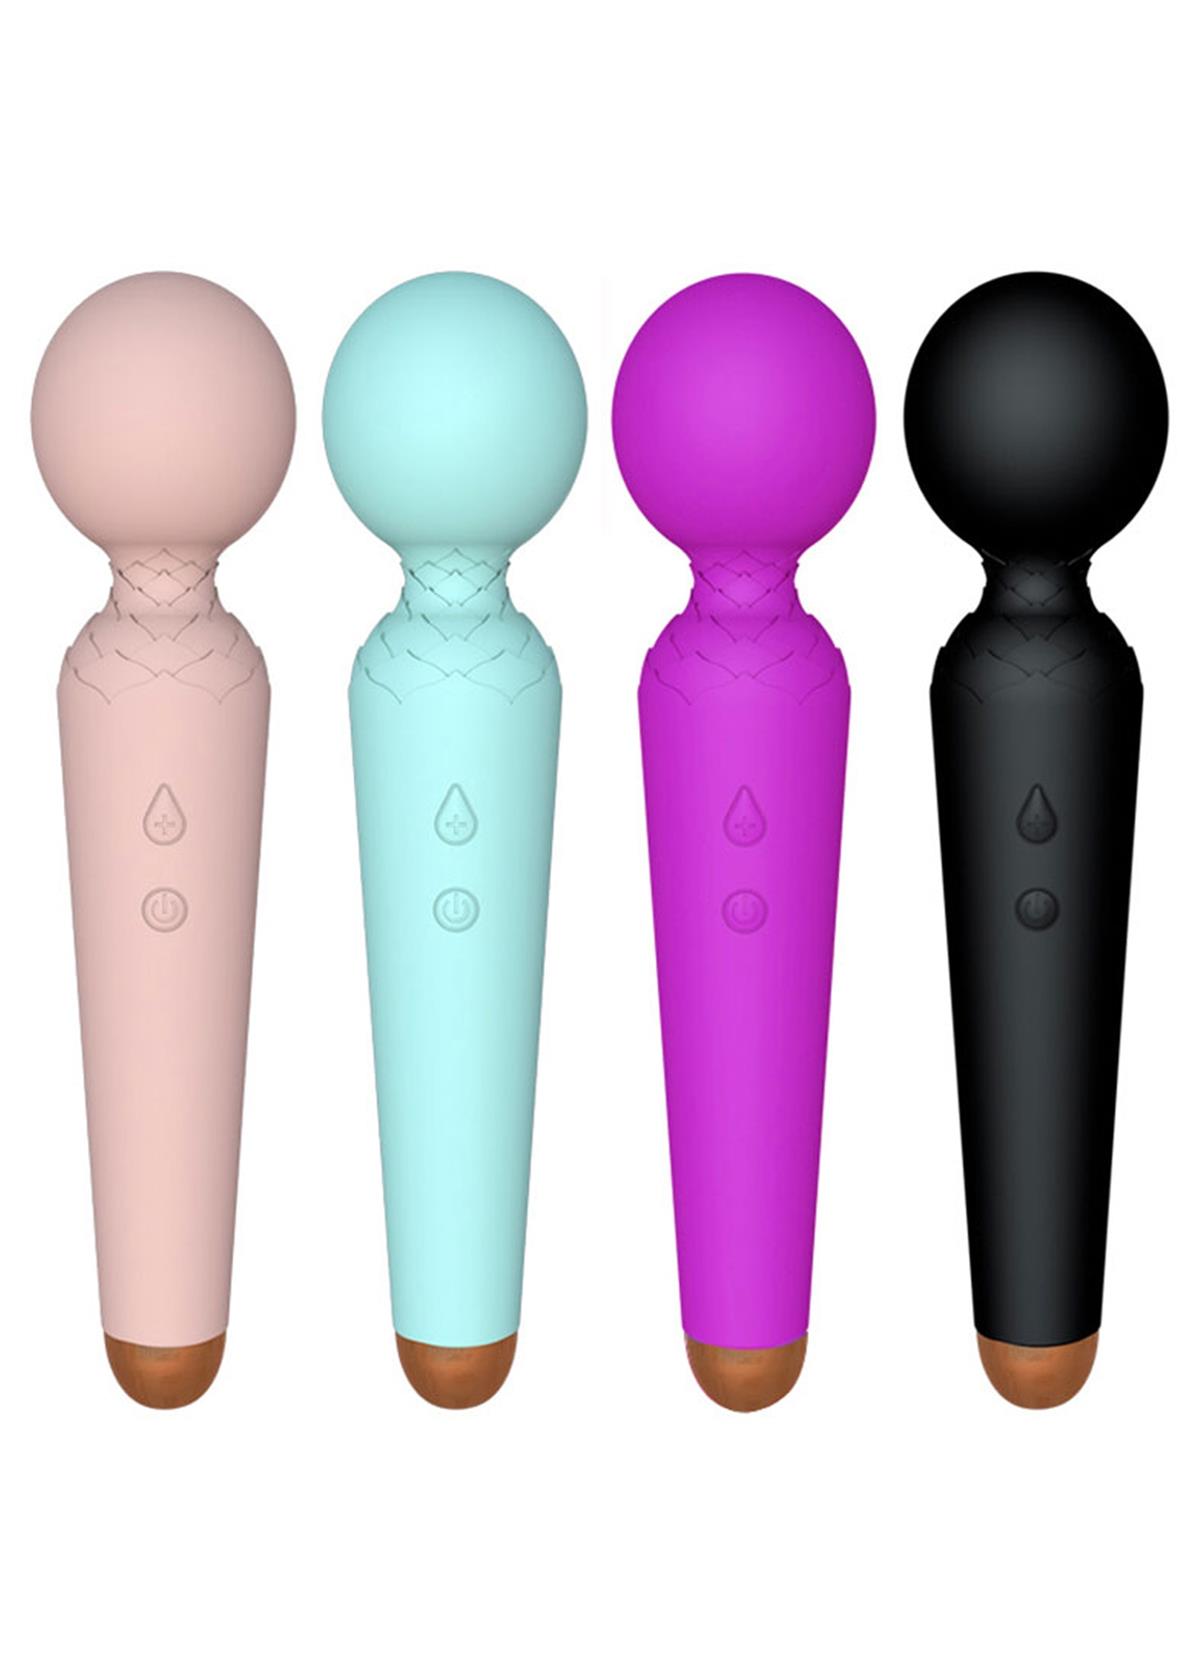 Bossoftoys - 22-00050 - Power wand Massager vibrator - 10 Functions - Silicone - 19,5 cm -  dia 4 cm - Rechargeable - attractive Colour windowbox - Purple